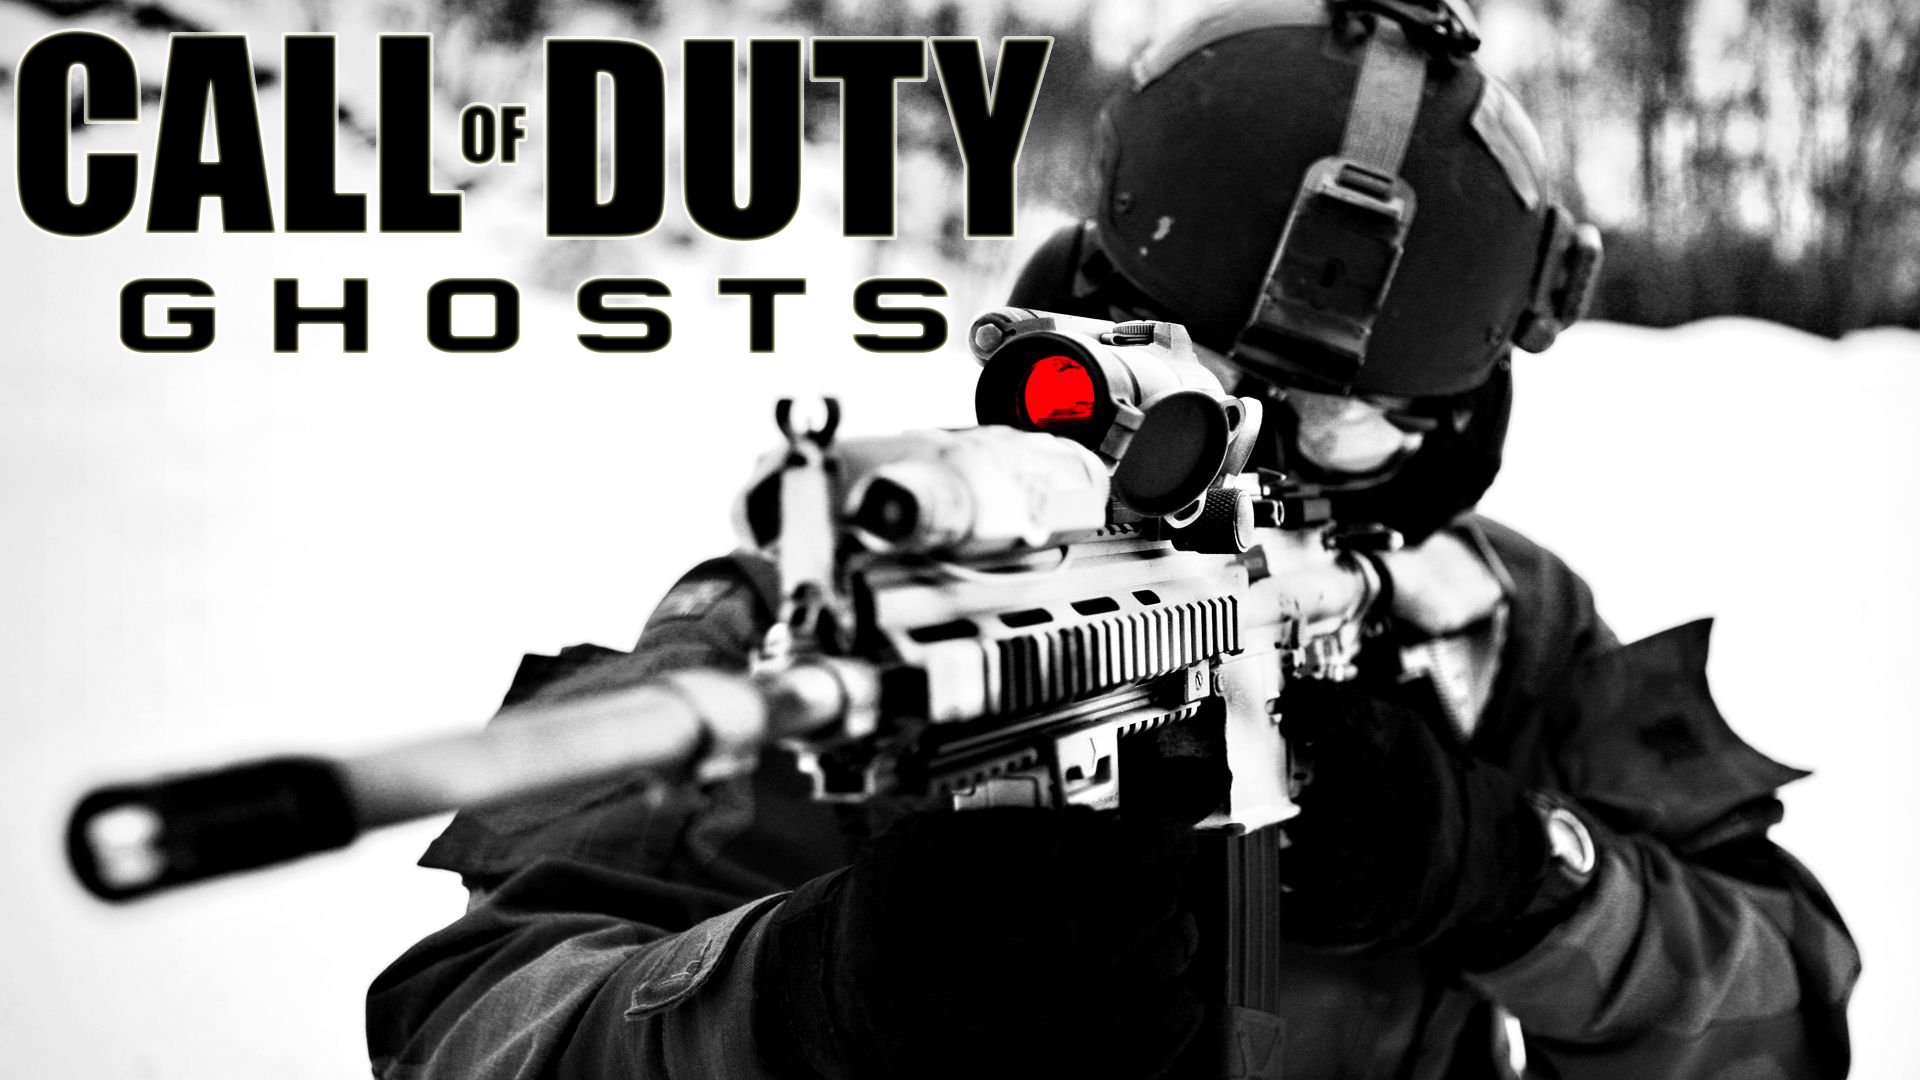 Cool Call of Duty Ghosts Wallpaper 1920x1080